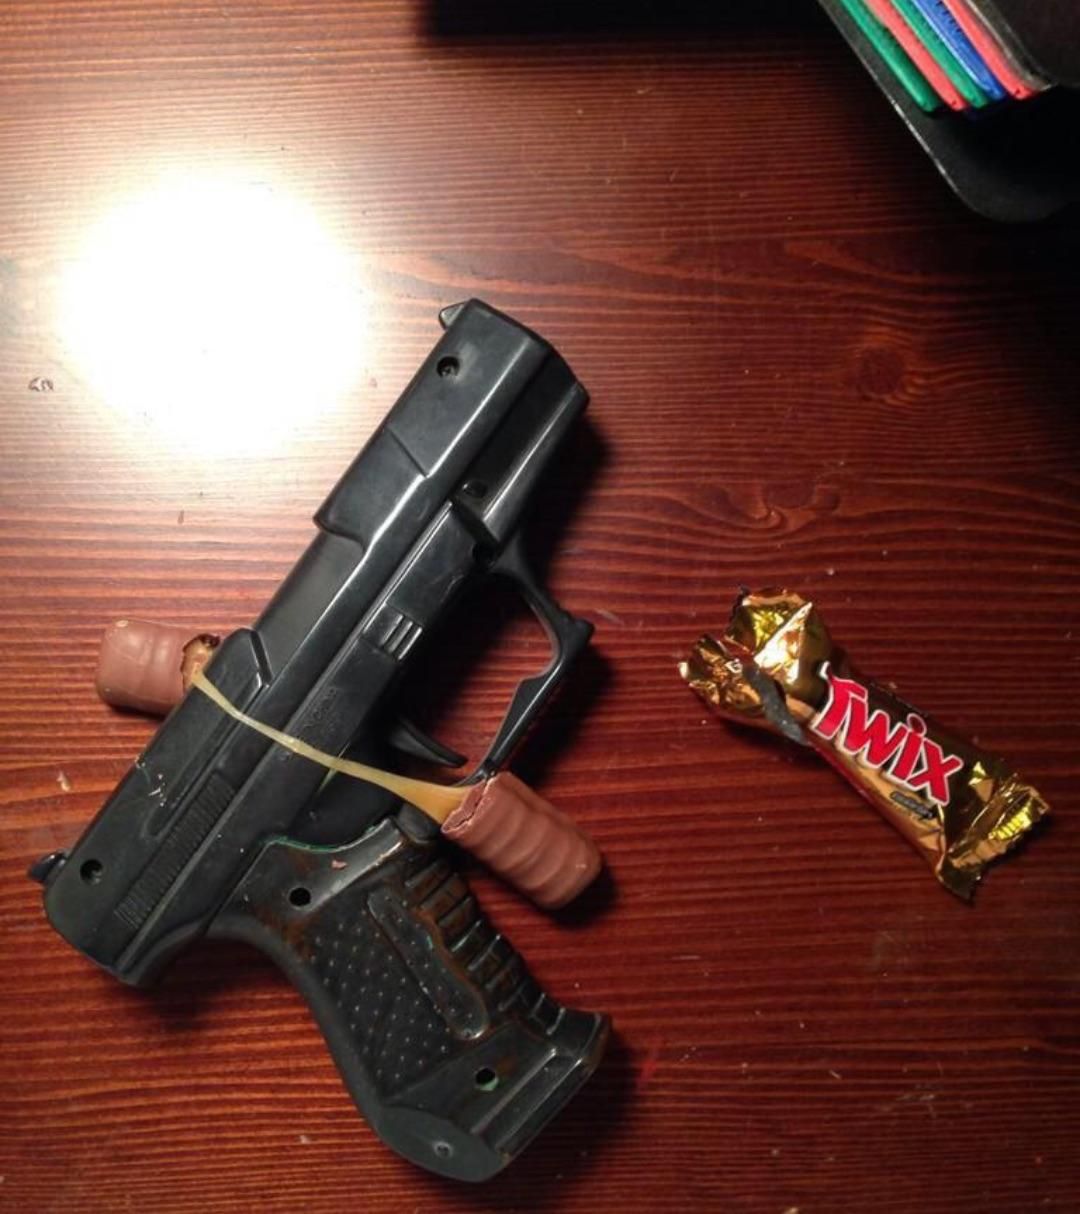 Reminder to always check your children’s candy